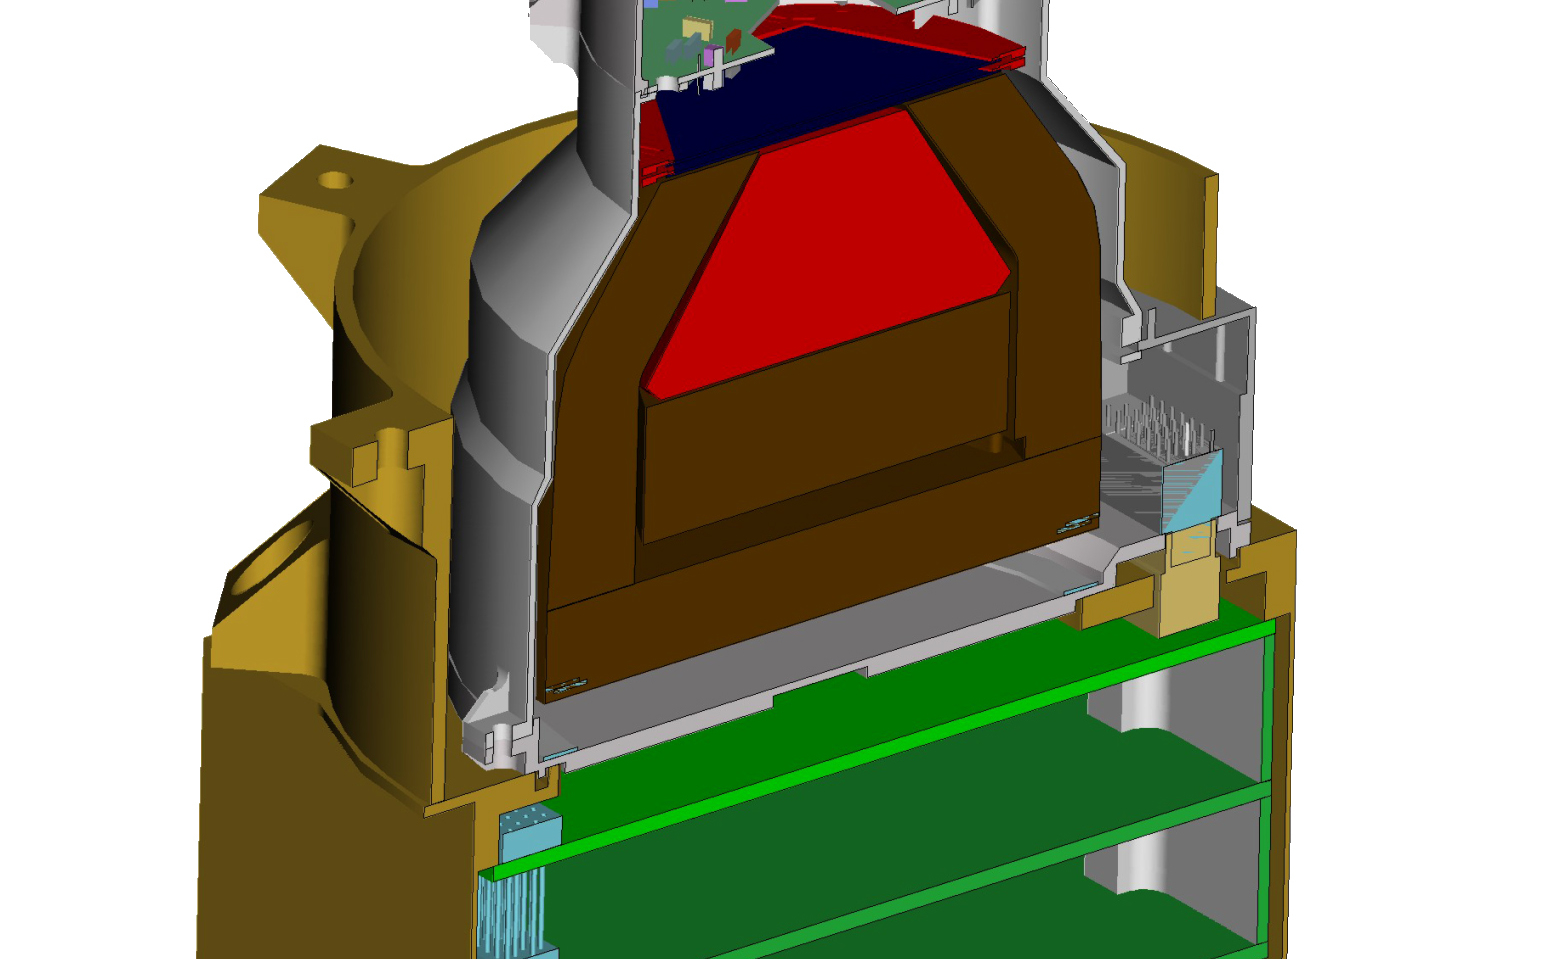 This color sketch shows a cross-section of the interior of a small metal box that supports a cylindrical telescope lens on top. Beneath the telescope lens, inside both the telescope housing and the box, are various detectors and circuit boards that will detect and identify energetic particles.